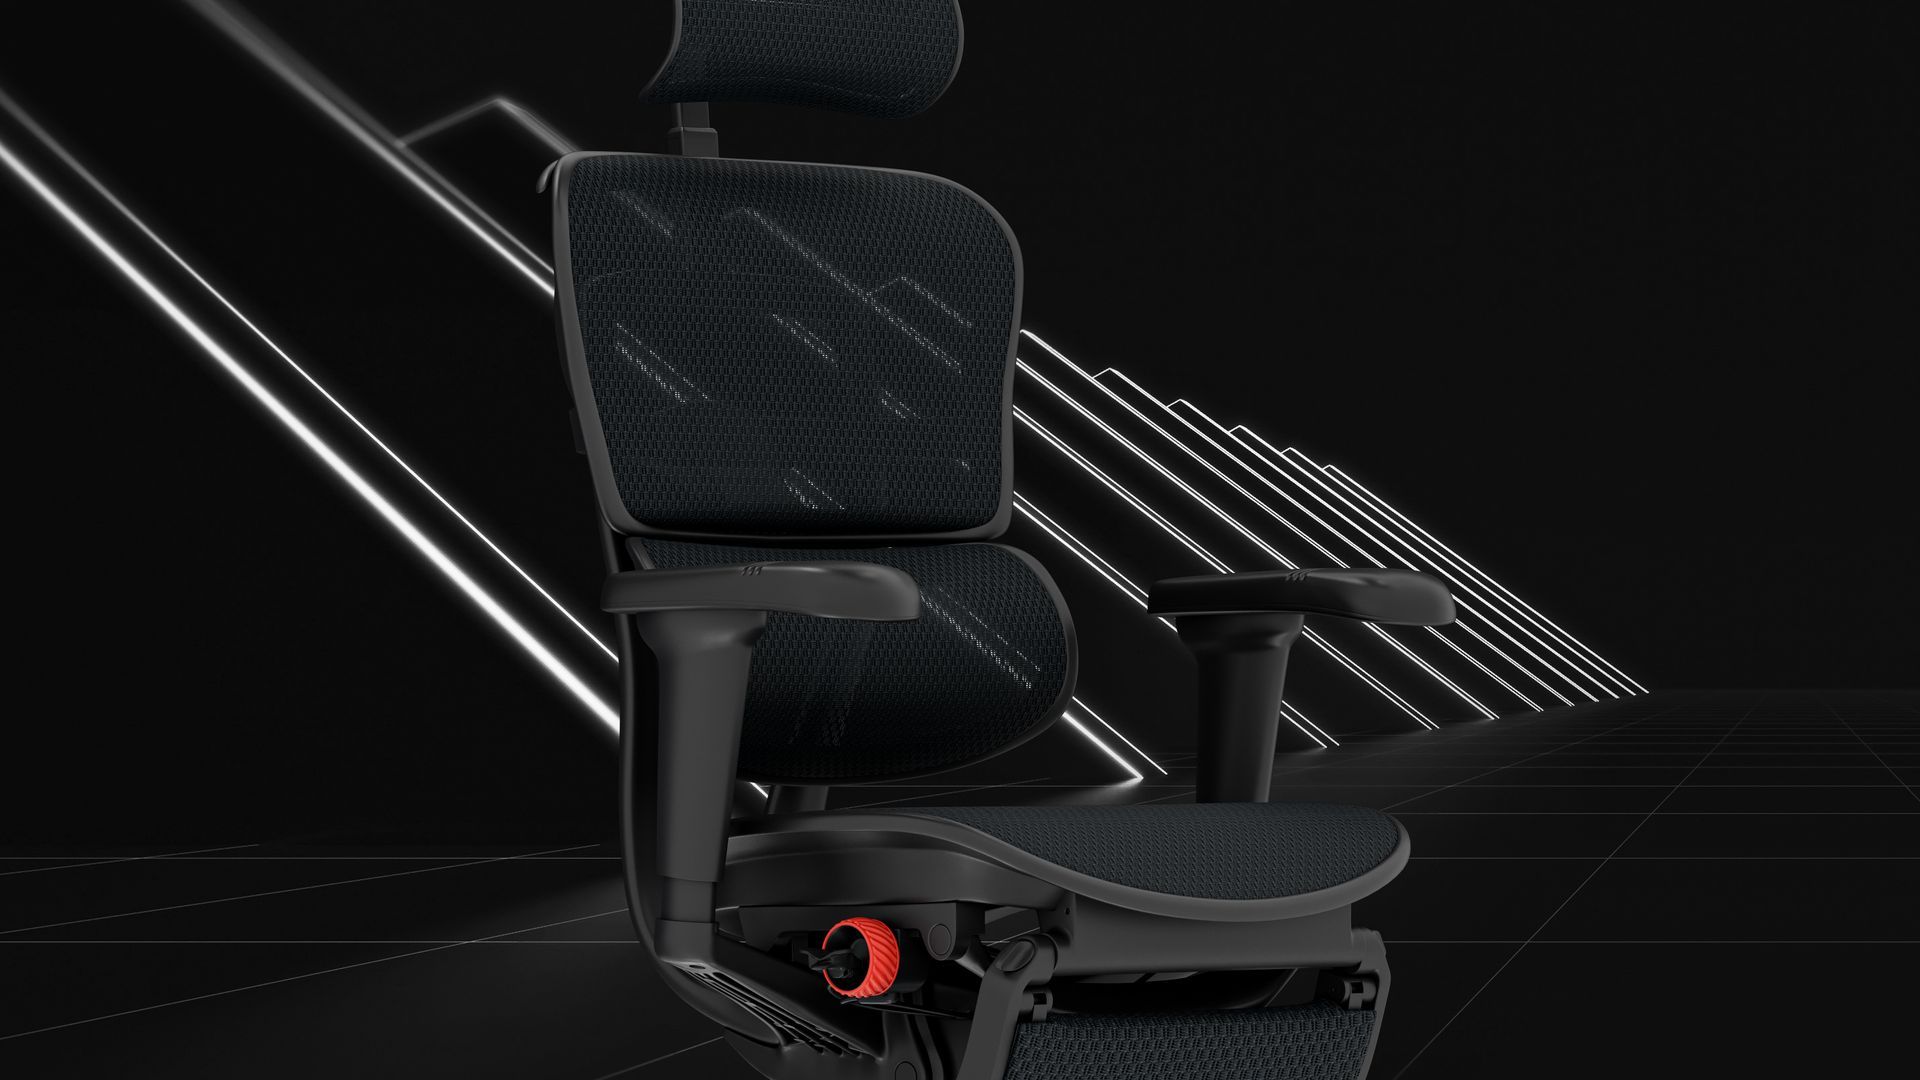 Ergohuman gaming chair in black facing front right in a large black, dimly lit room with white LED diaganol pillars behind